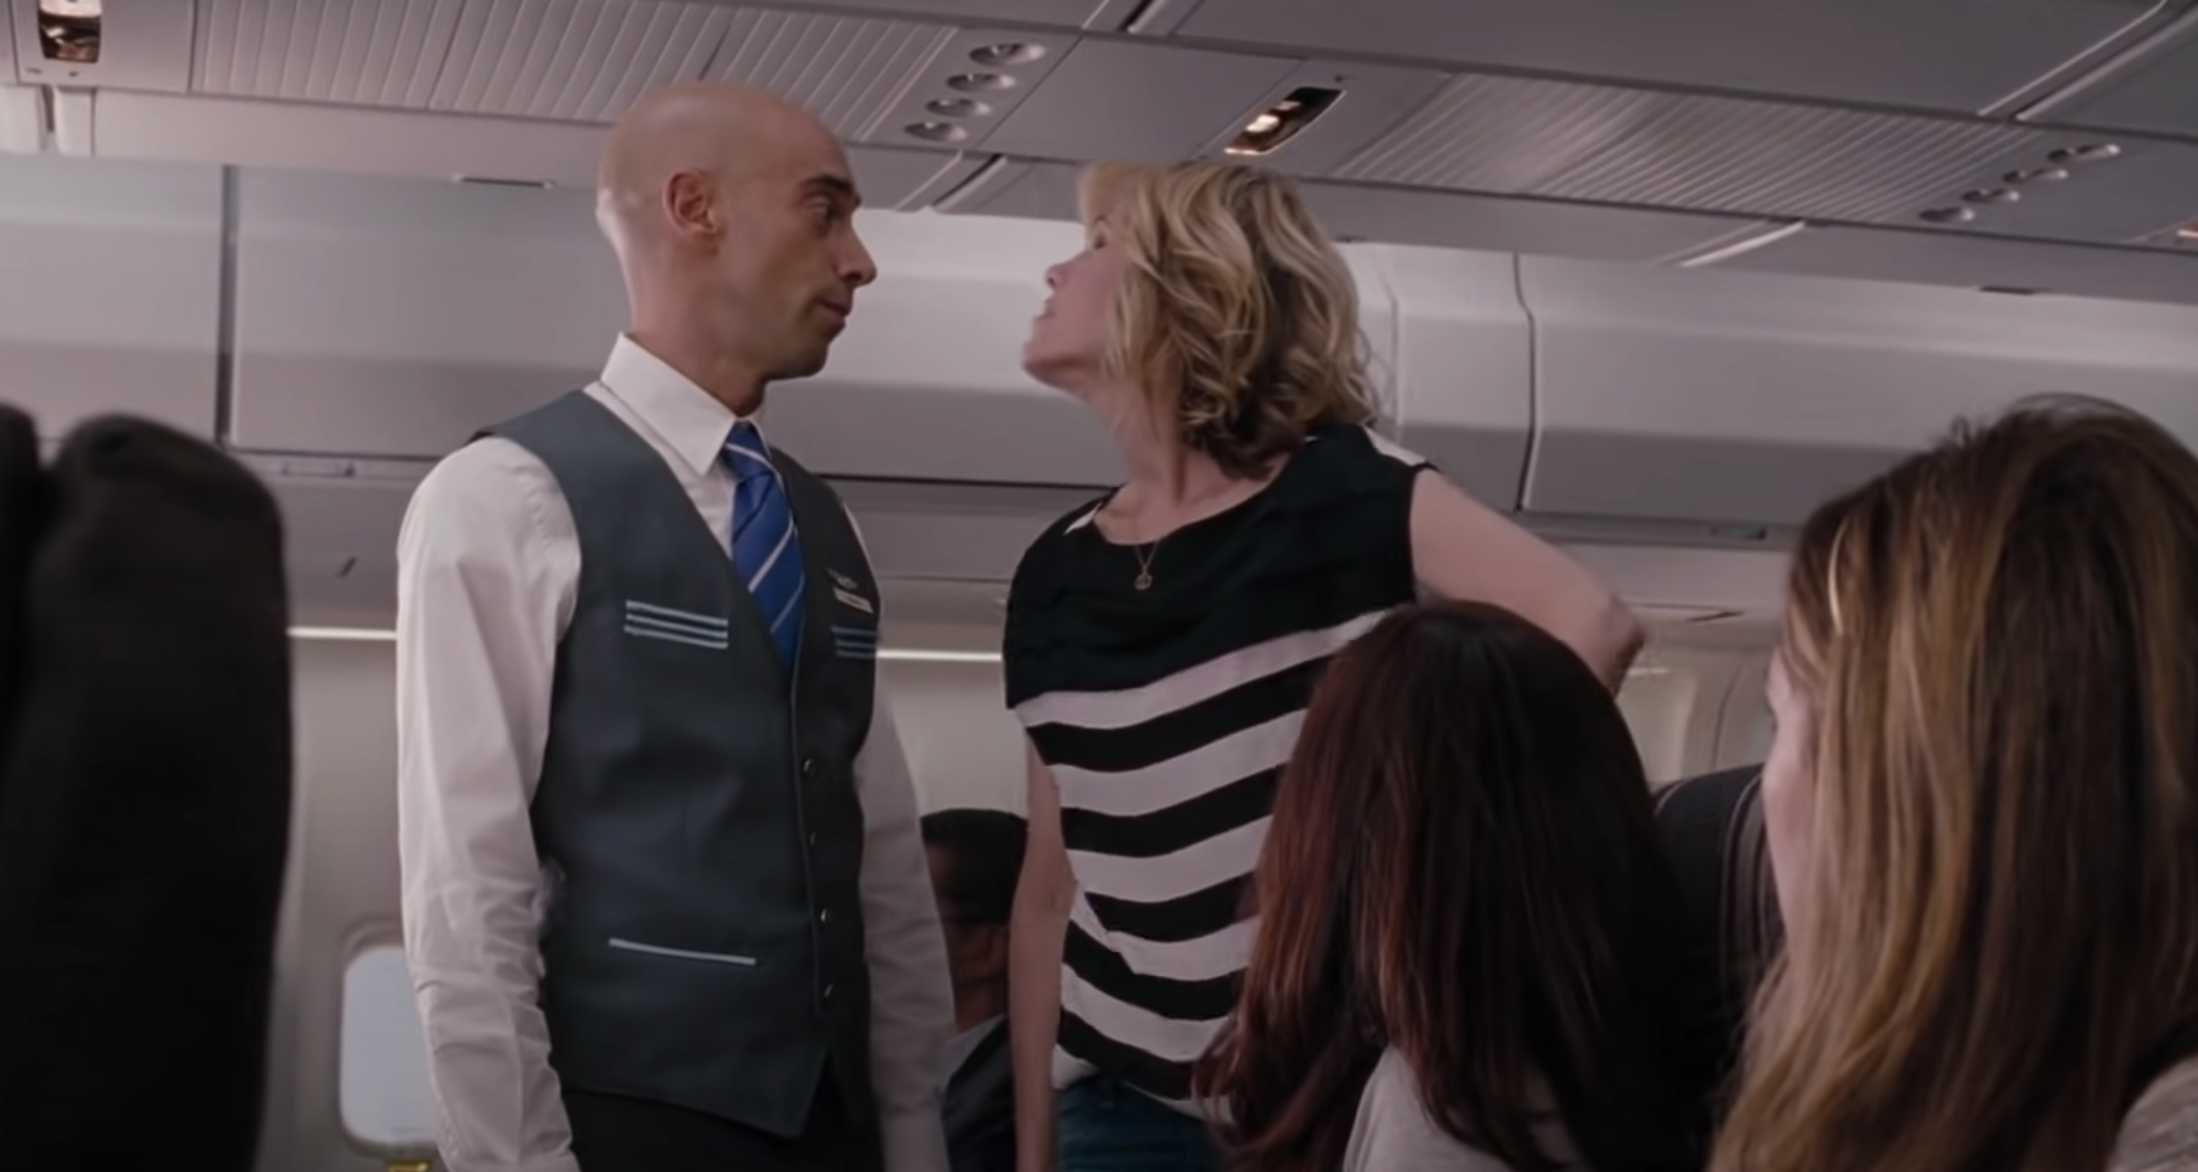 A woman confronts a man in a flight attendant uniform in the plane aisle